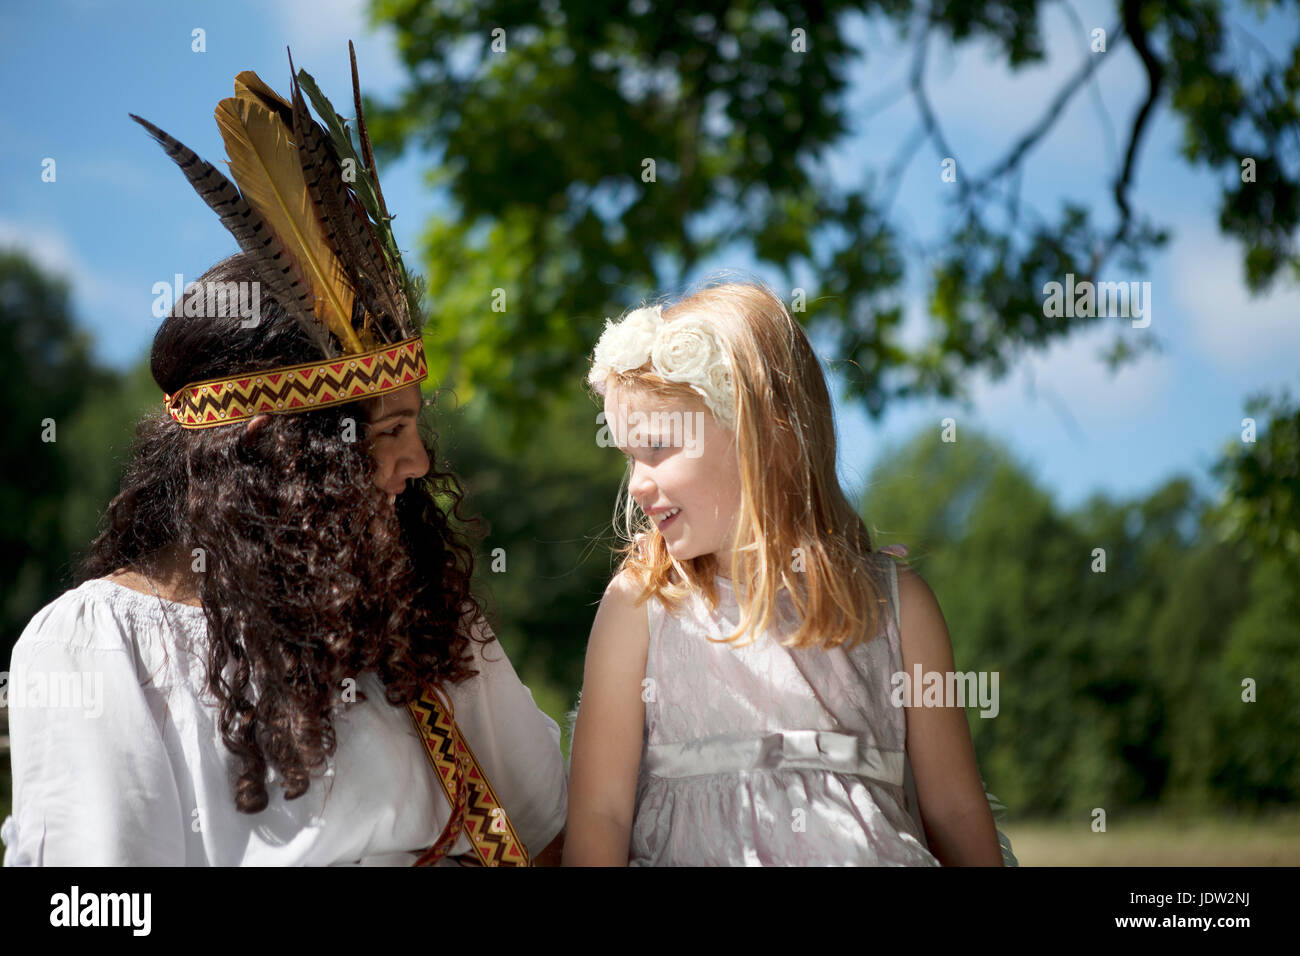 Girls in costumes sitting outdoors Stock Photo